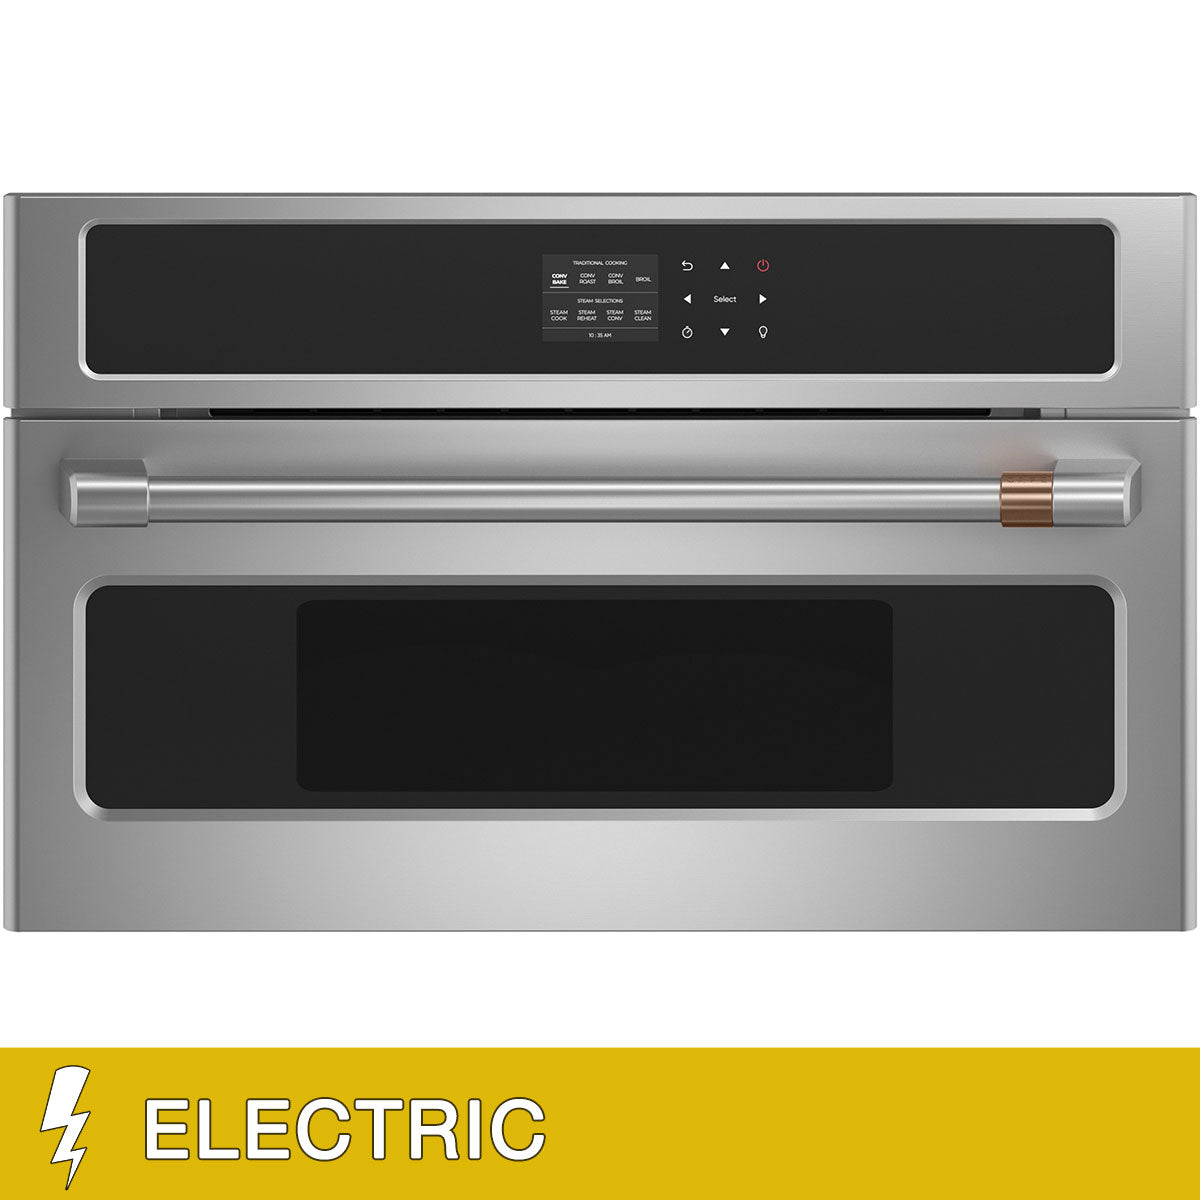 Café 30 inch. Built-In Microwave Convection Oven with Combination Fast Cook in Stainless Steel Image